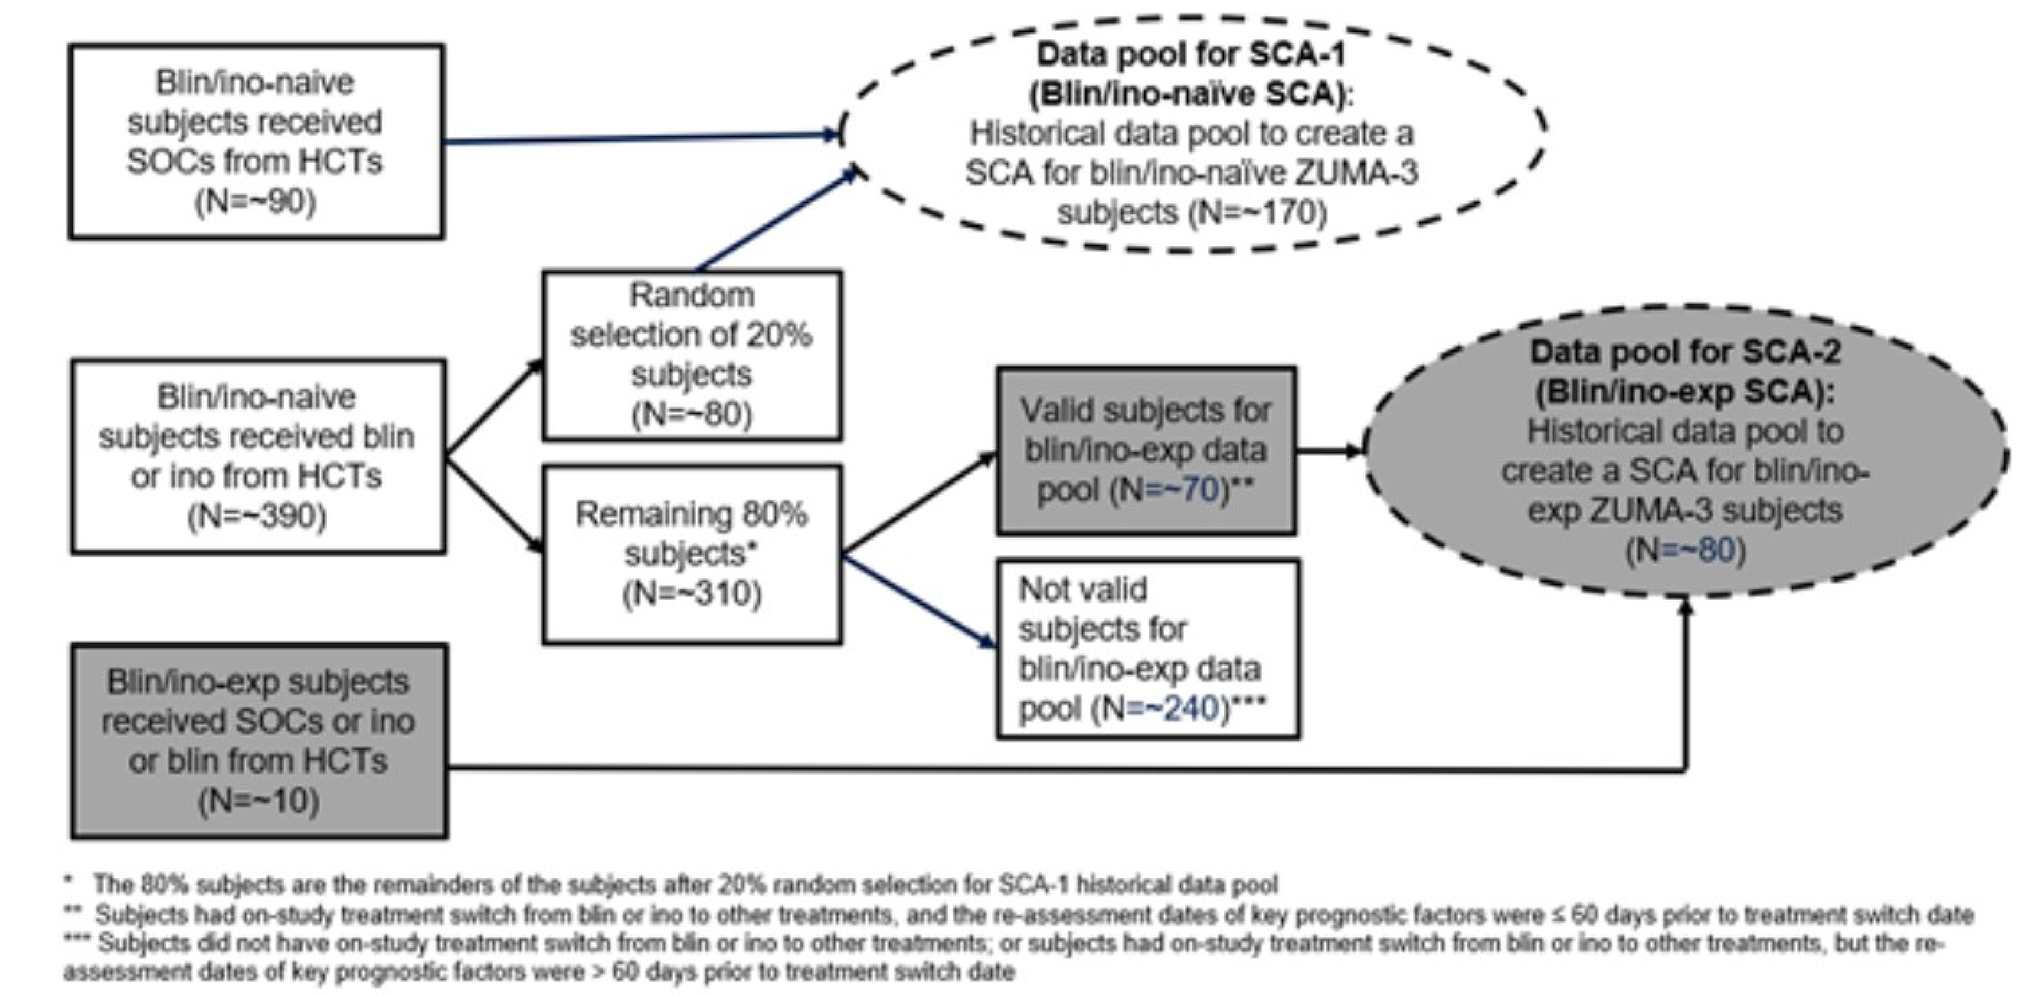 A flow diagram of the sampling approach used in the construction of the synthetic control arms (SCAs) is presented. The data pool for SCA-1 (patients previously treatment naive to blinatumomab and inotuzumab) consisted of patients who received standard of care (SOC) and a random selection of 20% of patients who received blinatumomab or inotuzumab in the historical clinical trials (N = approximately 170). The data pool for SCA-2 (patients experienced with blinatumomab or inotuzumab) consisted of patients who received SOC, inotuzumab, or blinatumomab and valid patients from the remaining 80% of patients who were previously treatment naive to blinatumomab and inotuzumab and received blinatumomab or inotuzumab in the historical clinical trials (N = approximately 80). Valid patients were defined as those who had an on-study treatment switch from blinatumomab or inotuzumab to other SOC treatments, and the reassessment dates of key prognostic factors were 60 days or more before the treatment switch date. Patients who did not meet the criteria were excluded from the study.